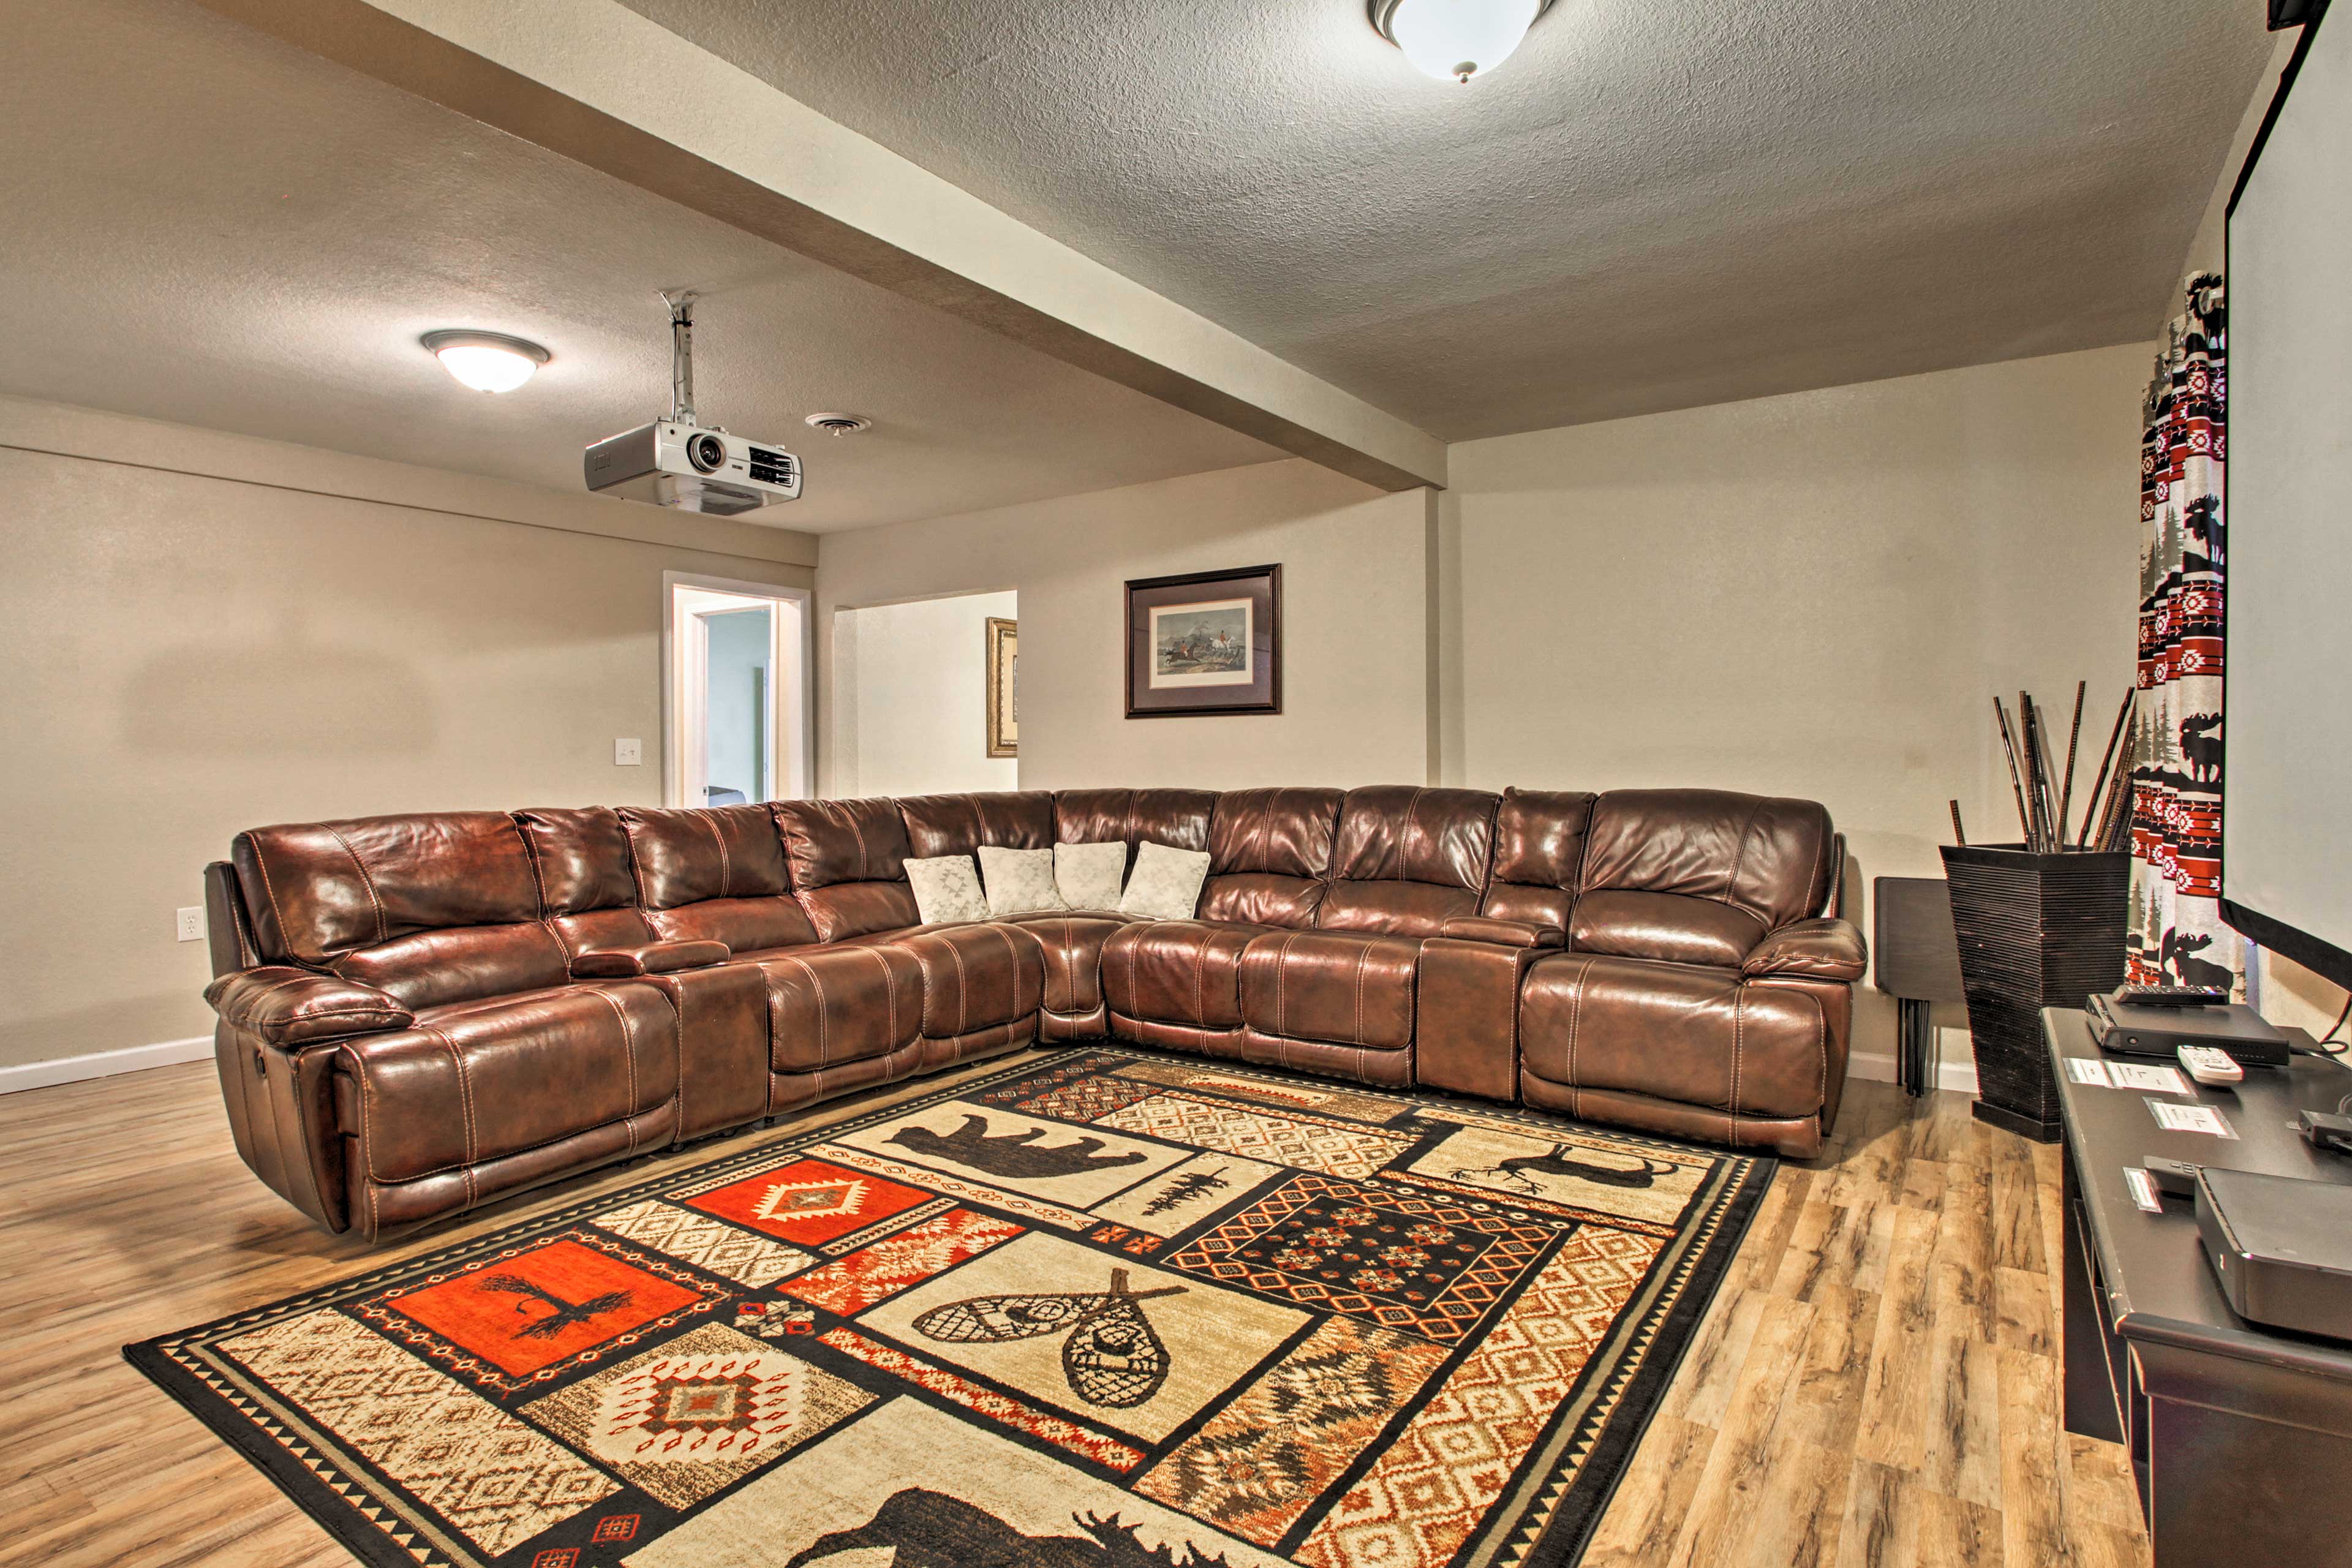 Spread out and kick back on the leather recliners.